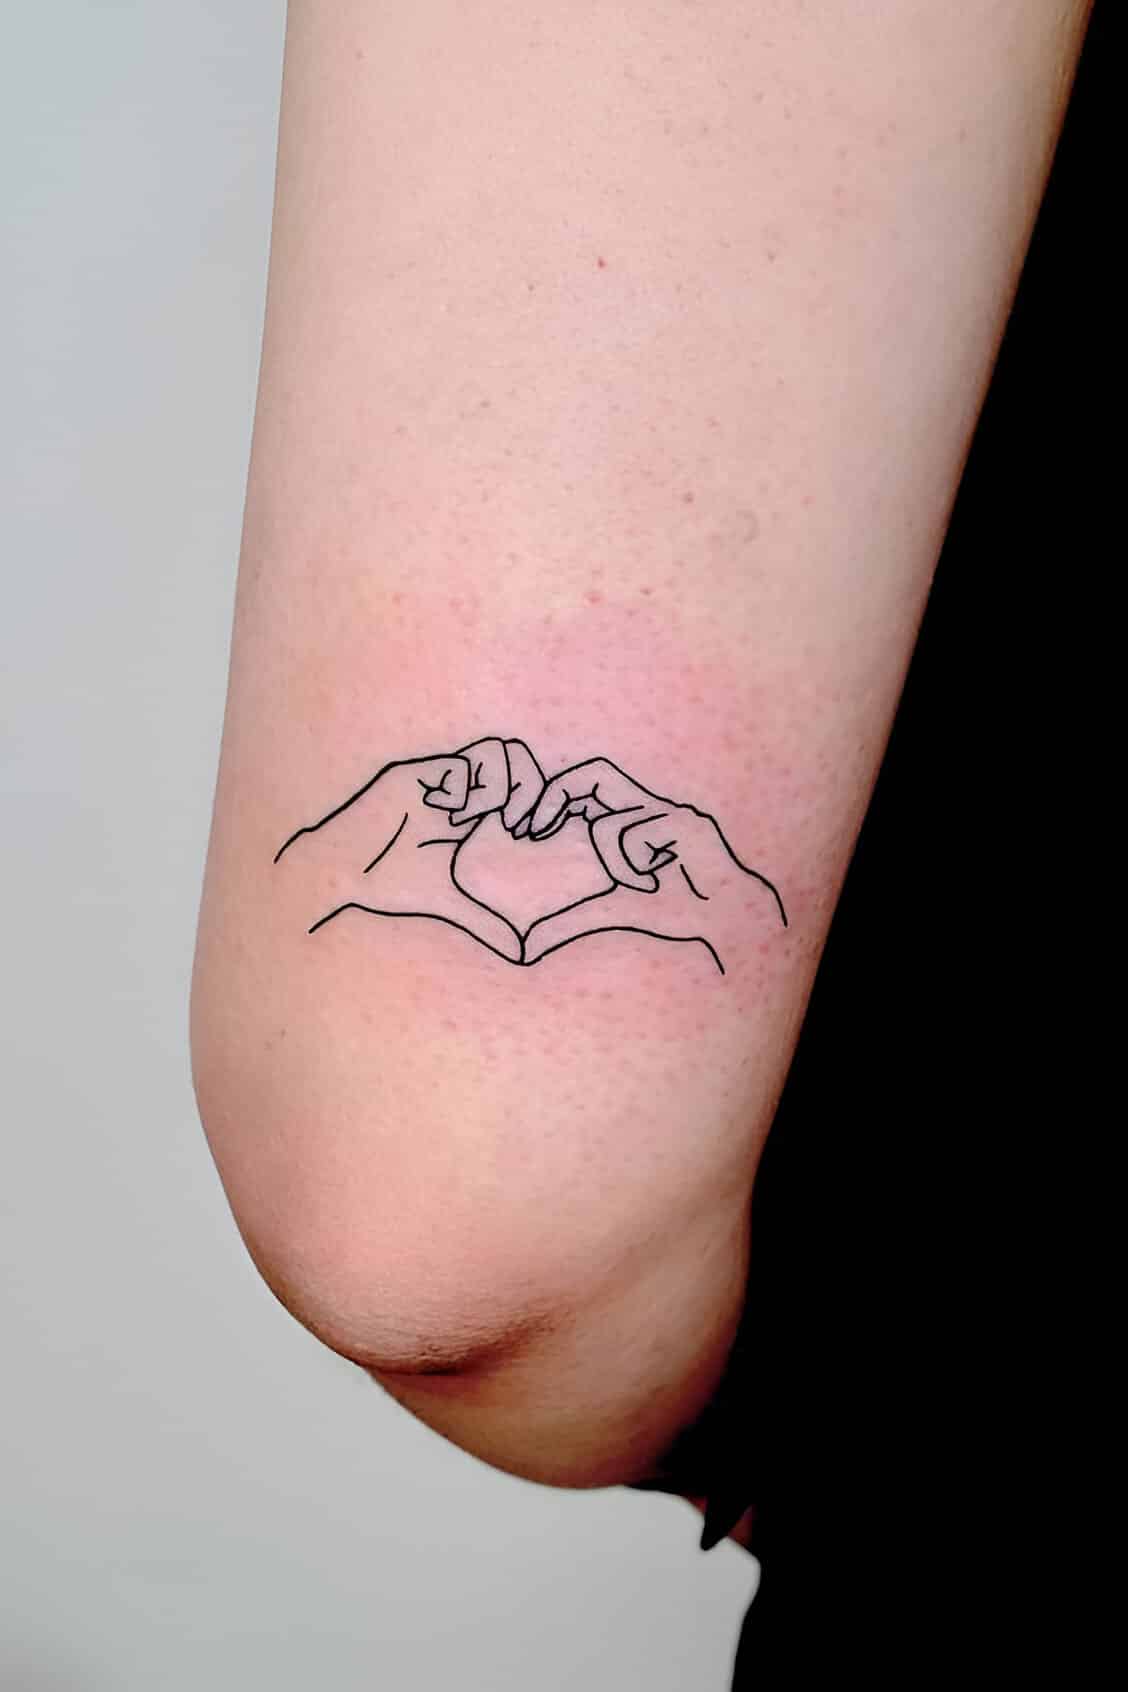 30 Elegant Matching Heart Tattoos To Get With Your Partner ASAP 9